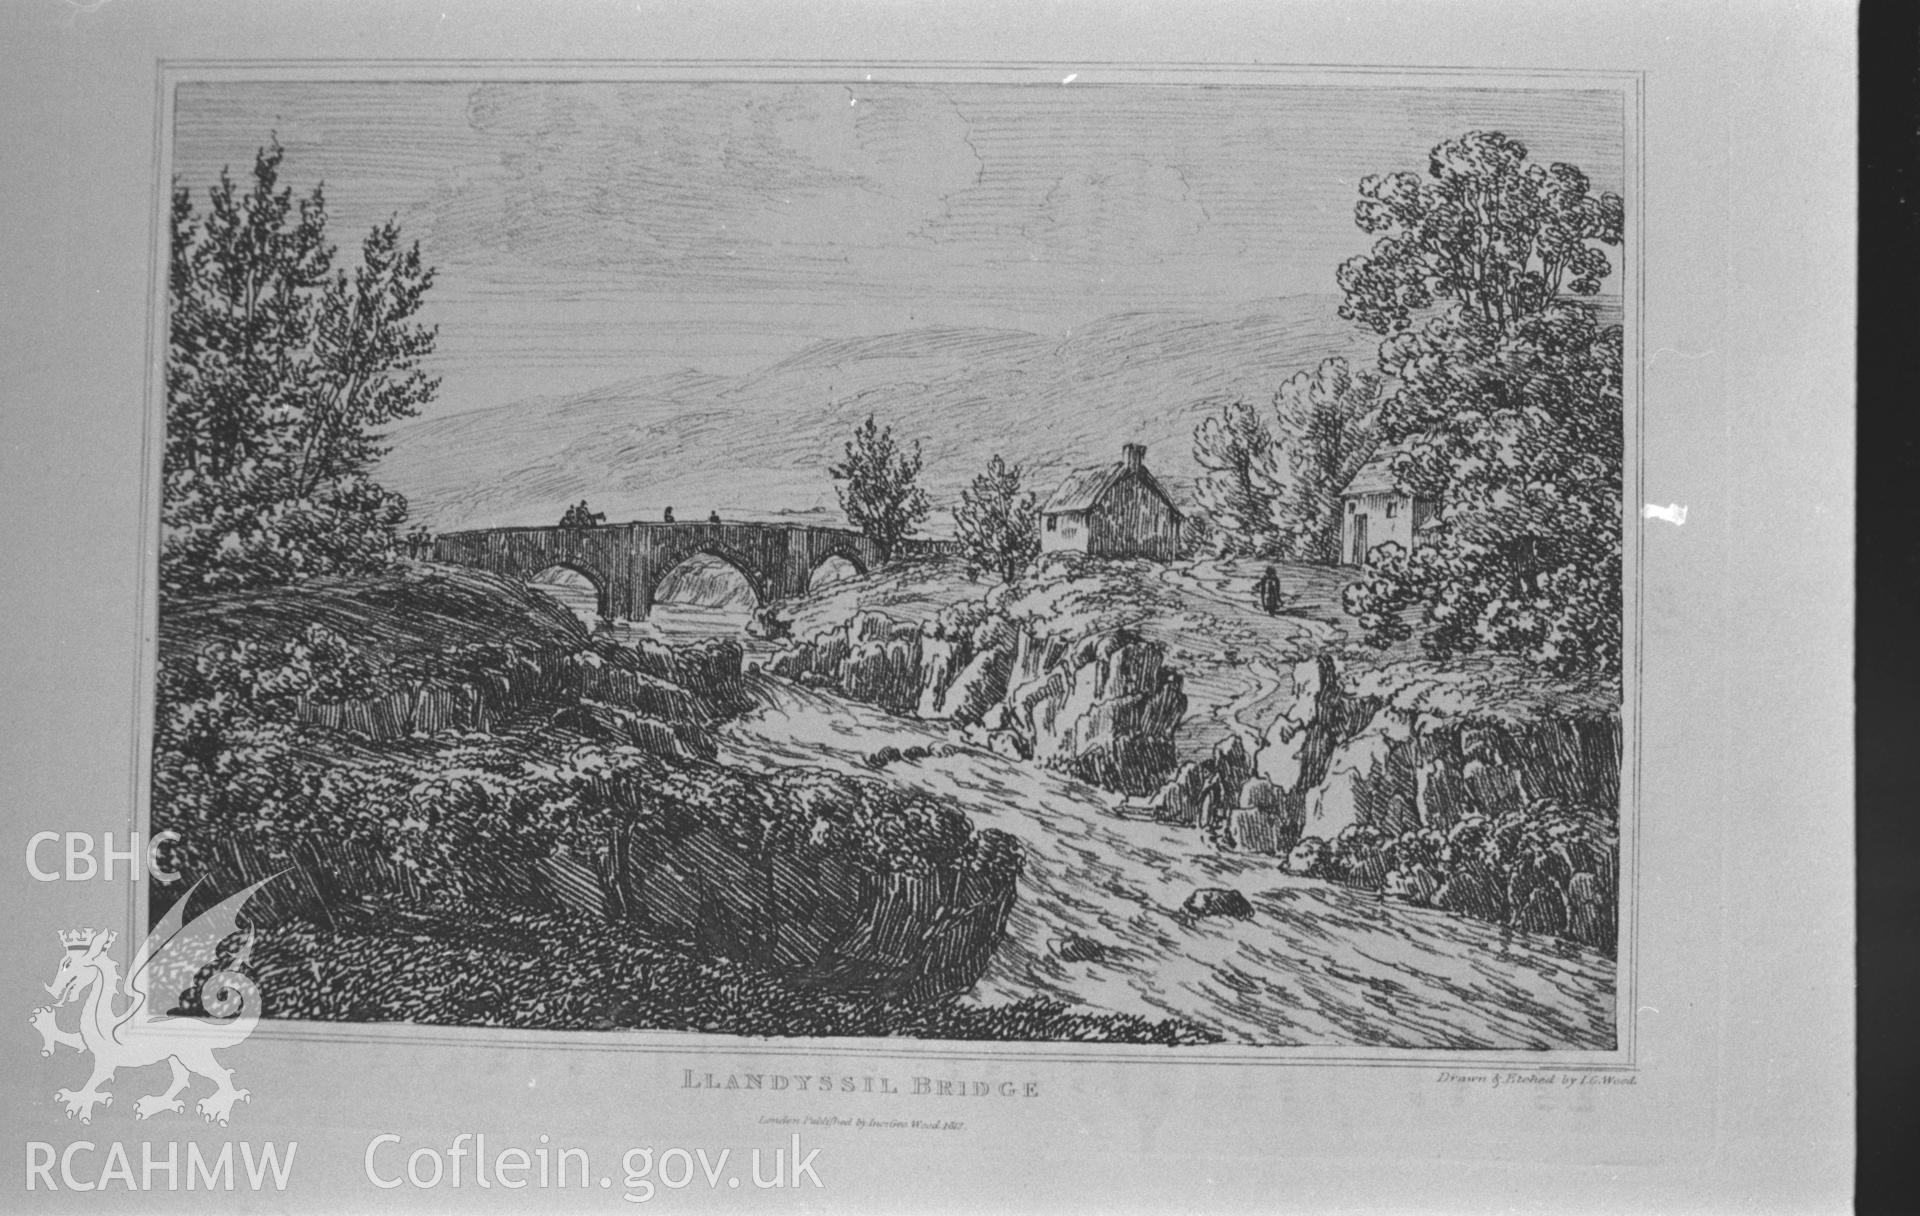 'Llandyssil Bridge' drawn and engraved by J. G. Woods, c.1810. Photographed by Arthur O. Chater in January 1968 for his own private research.